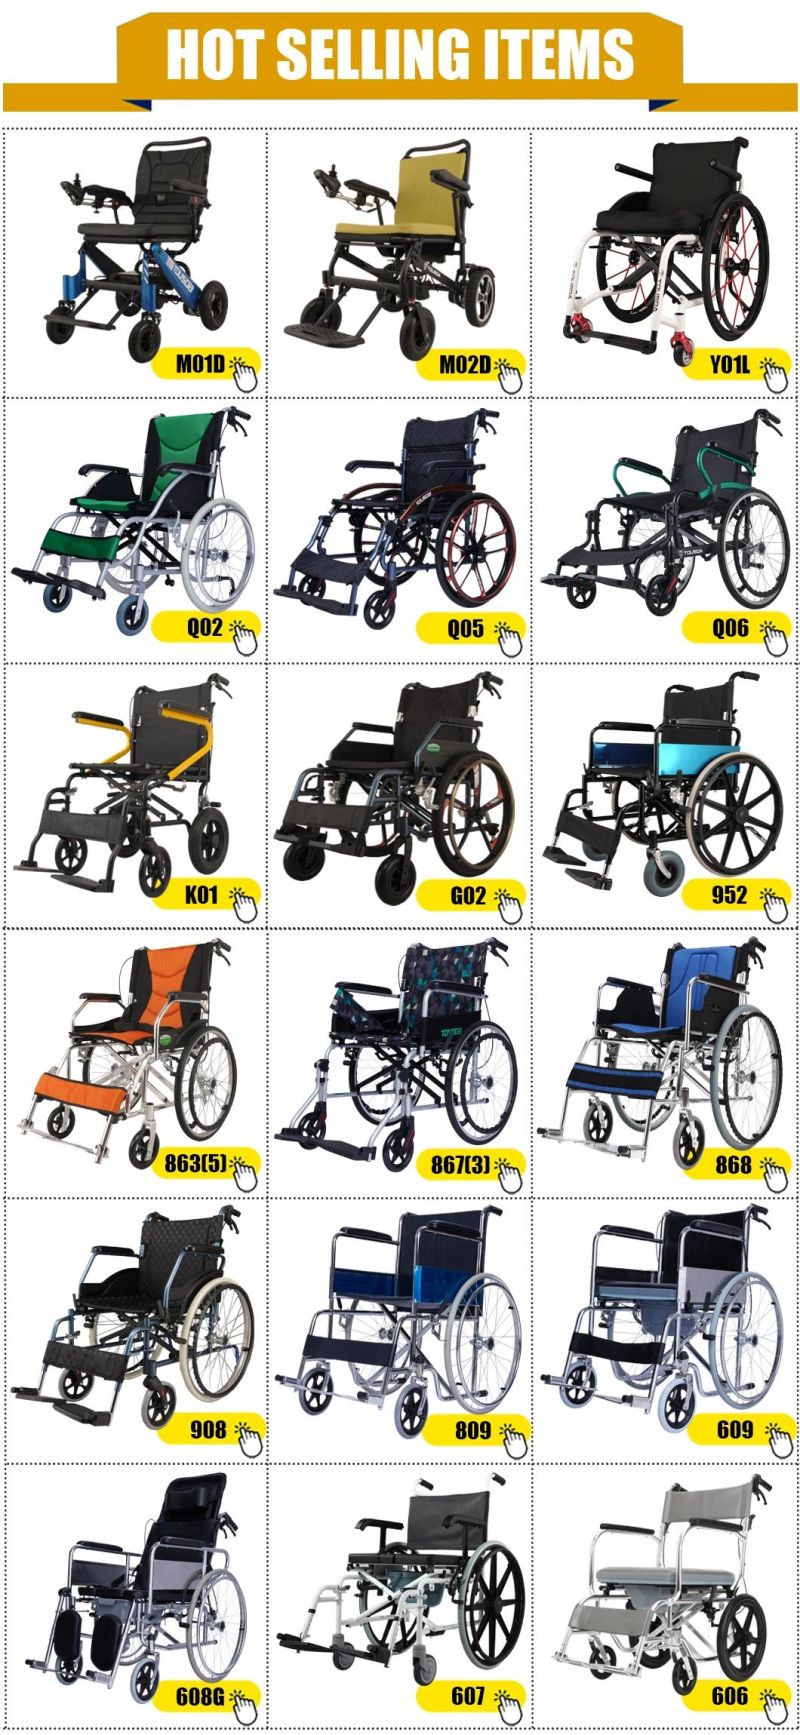 Manual Lightweight Wheel Chair Folding Steel Wheelchair for Elderly and Disabled